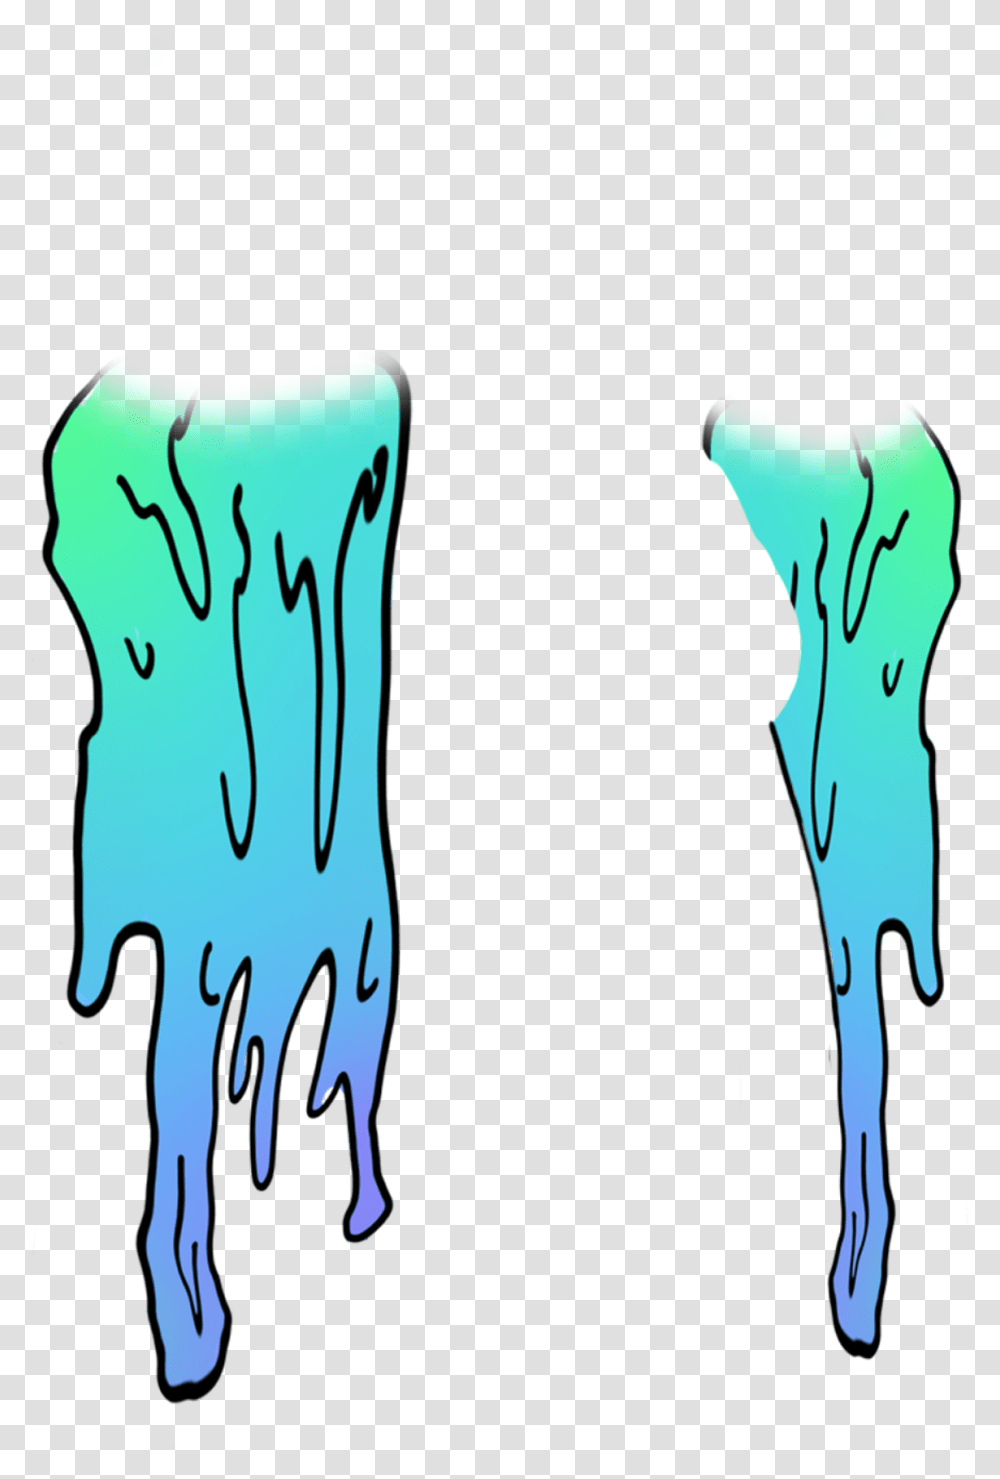 Slime Drips Dripping Drip Photography Drip, Plant, X-Ray, Ct Scan, Medical Imaging X-Ray Film Transparent Png